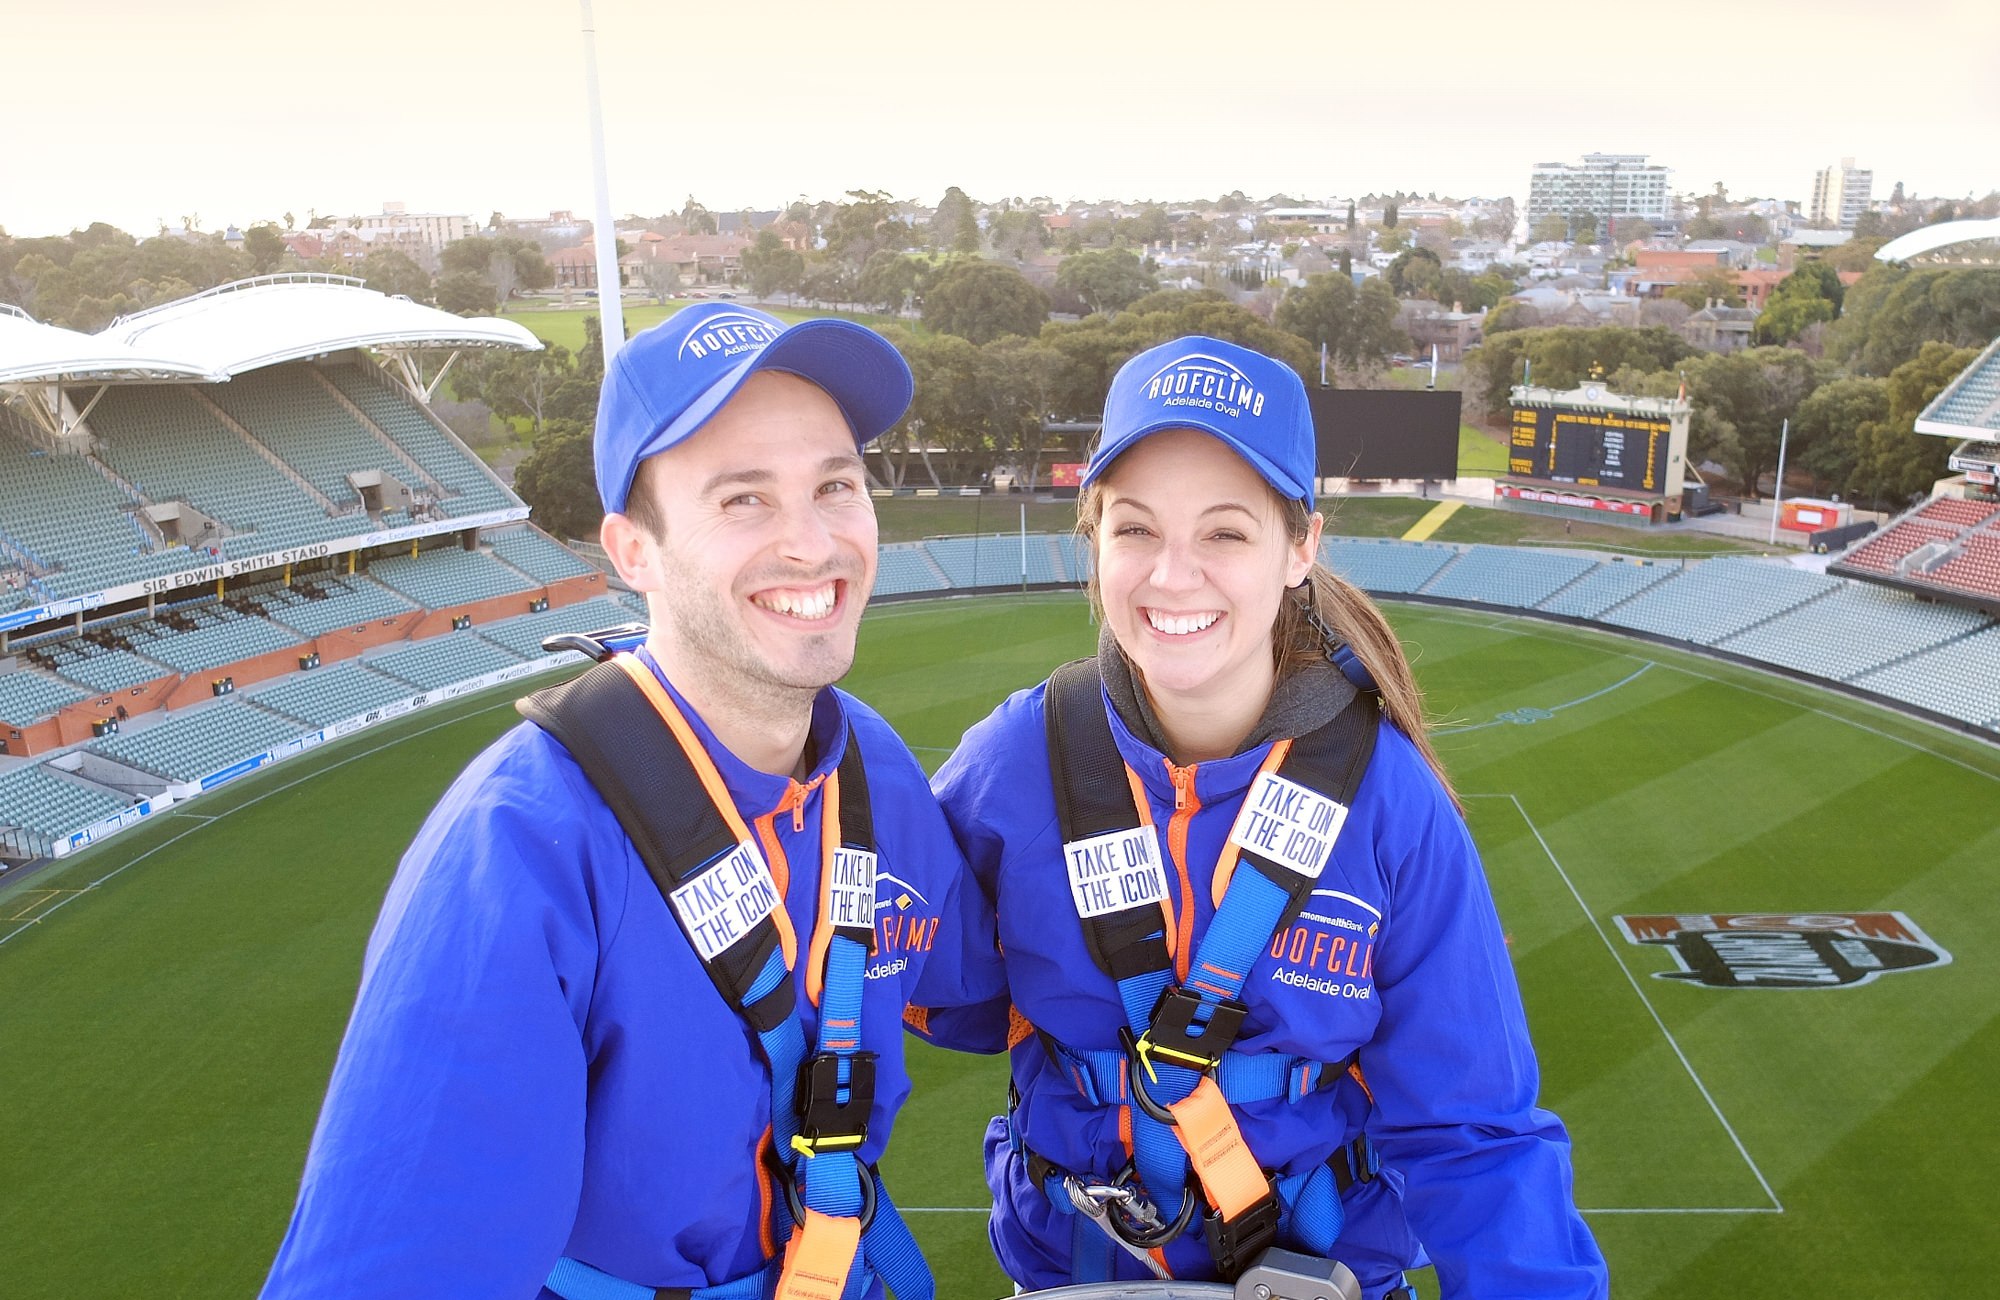 Daniel and Courtney RoofClimb Adelaide Oval Traveling Islanders South Australia Adelaide Attractions Sightseeing